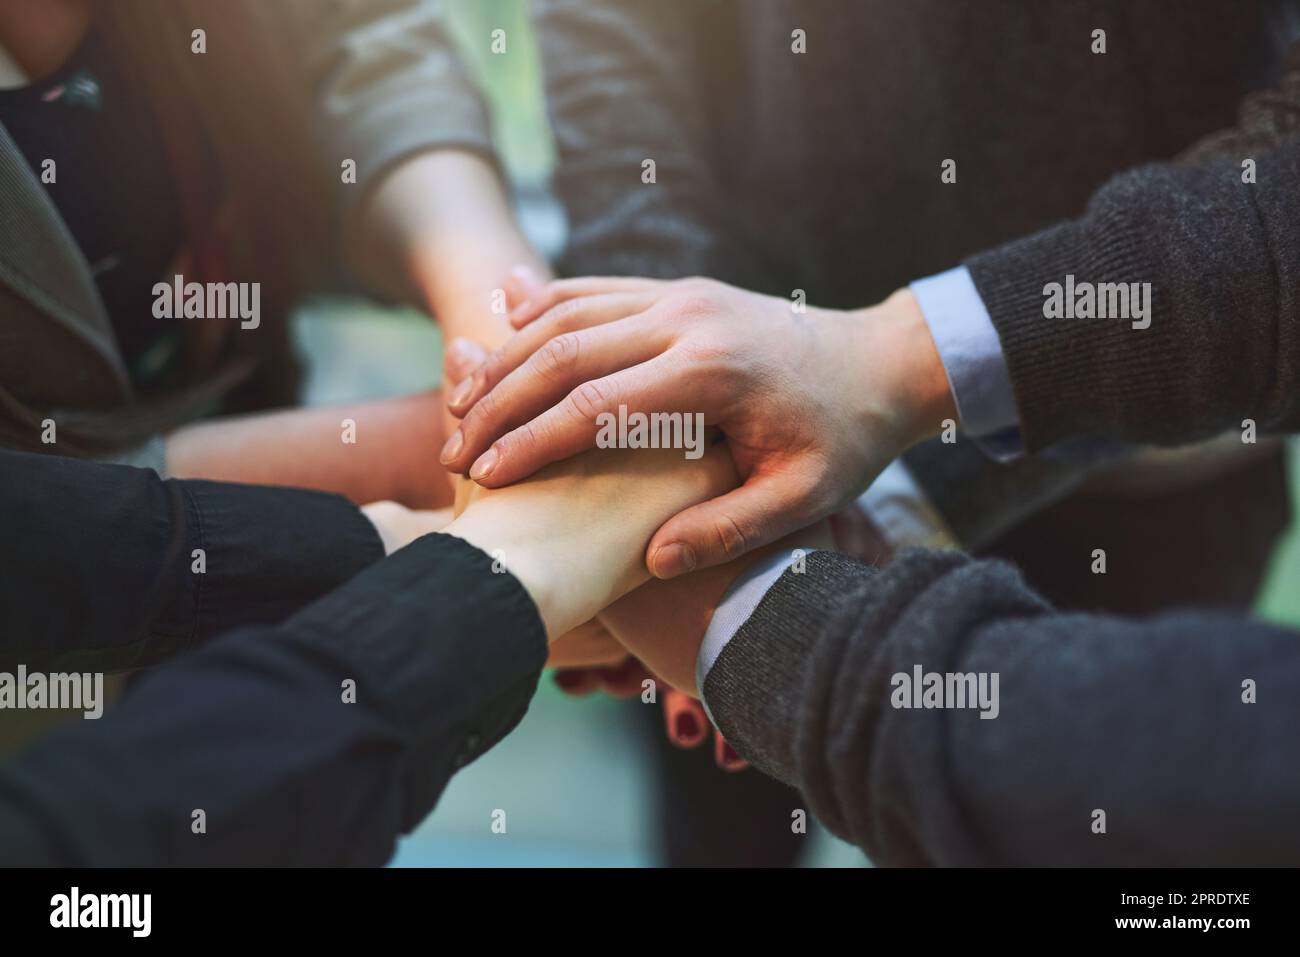 In business, teamwork does wonders. a group of unrecognizable businesspeople huddled together with their hands piled on top of each other in an office. Stock Photo